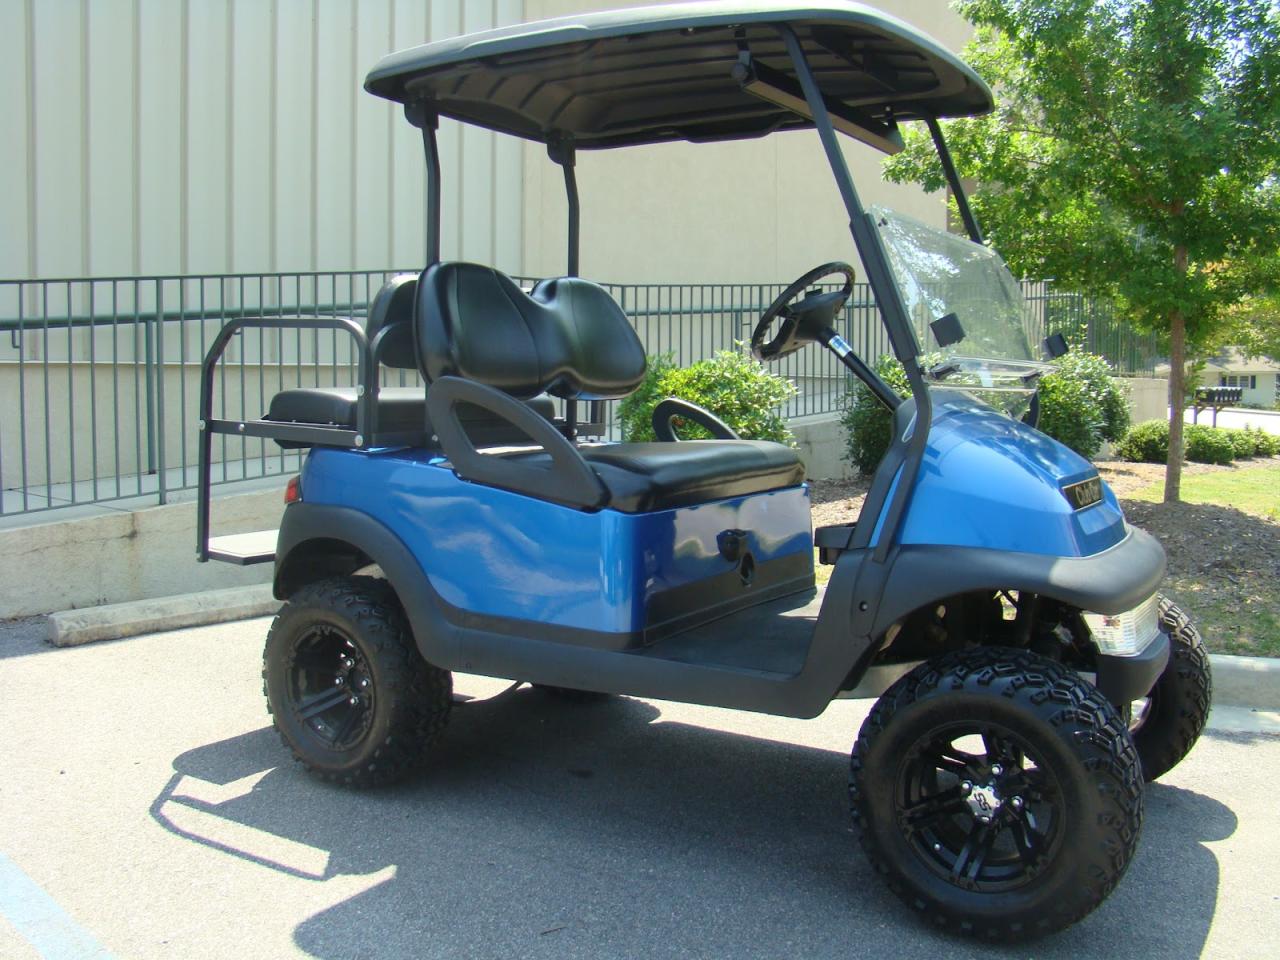 Used Golf Carts for Sale by Owner in Perkins, South Dakota: Find Your Perfect Ride Today!